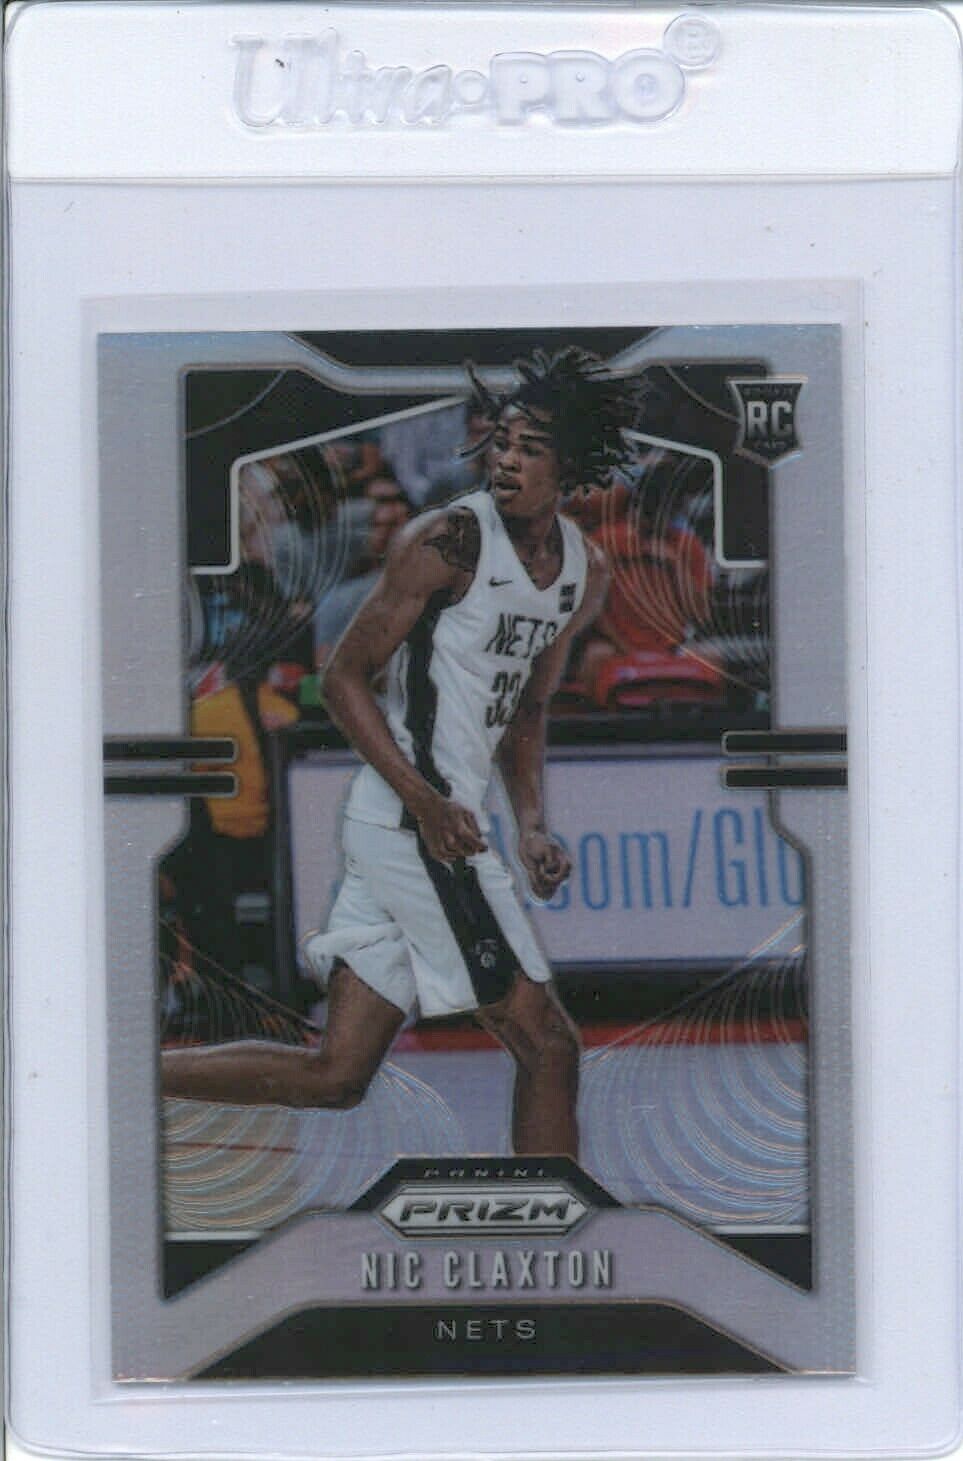 Image of Panini Prizm Silver RC Nic Claxton sports trading card